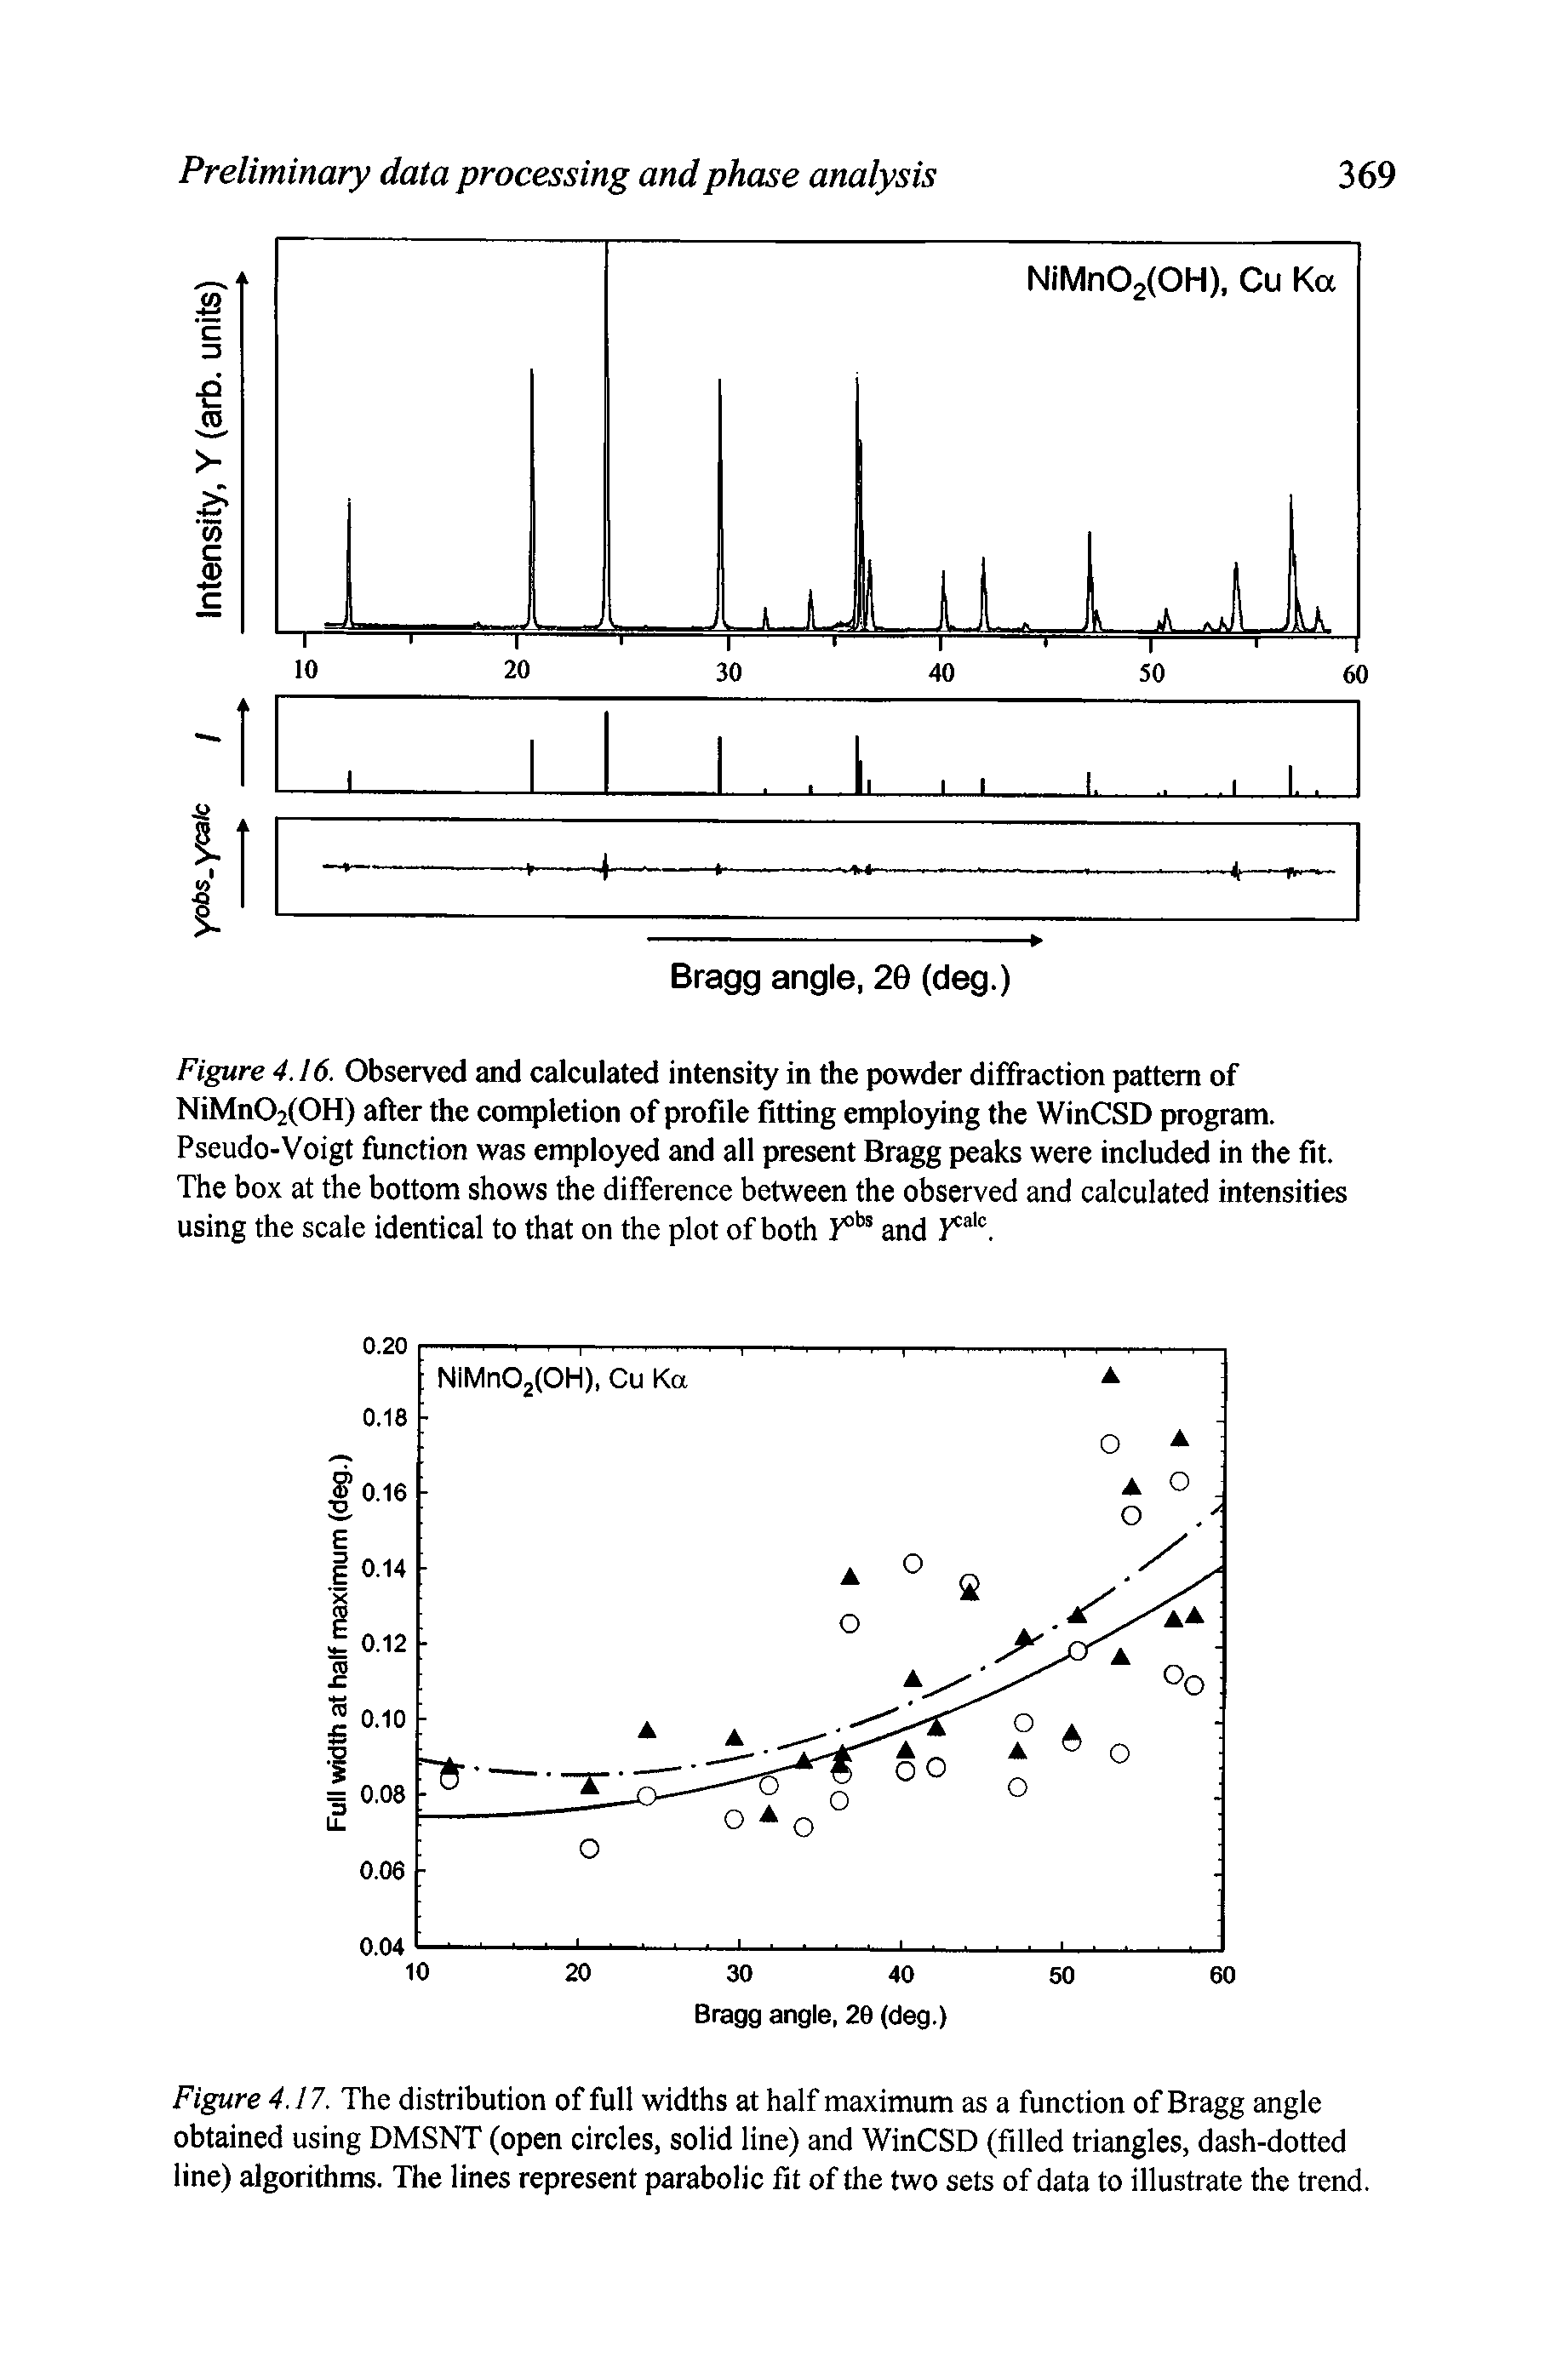 Figure 4.16. Observed and calculated intensity in the powder diffraction pattern of NiMn02(0H) after the completion of profile fitting employing the WinCSD program. Pseudo-Voigt function was employed and all present Bragg peaks were included in the fit. The box at the bottom shows the difference between the observed and calculated intensities using the scale identical to that on the plot of both y and...